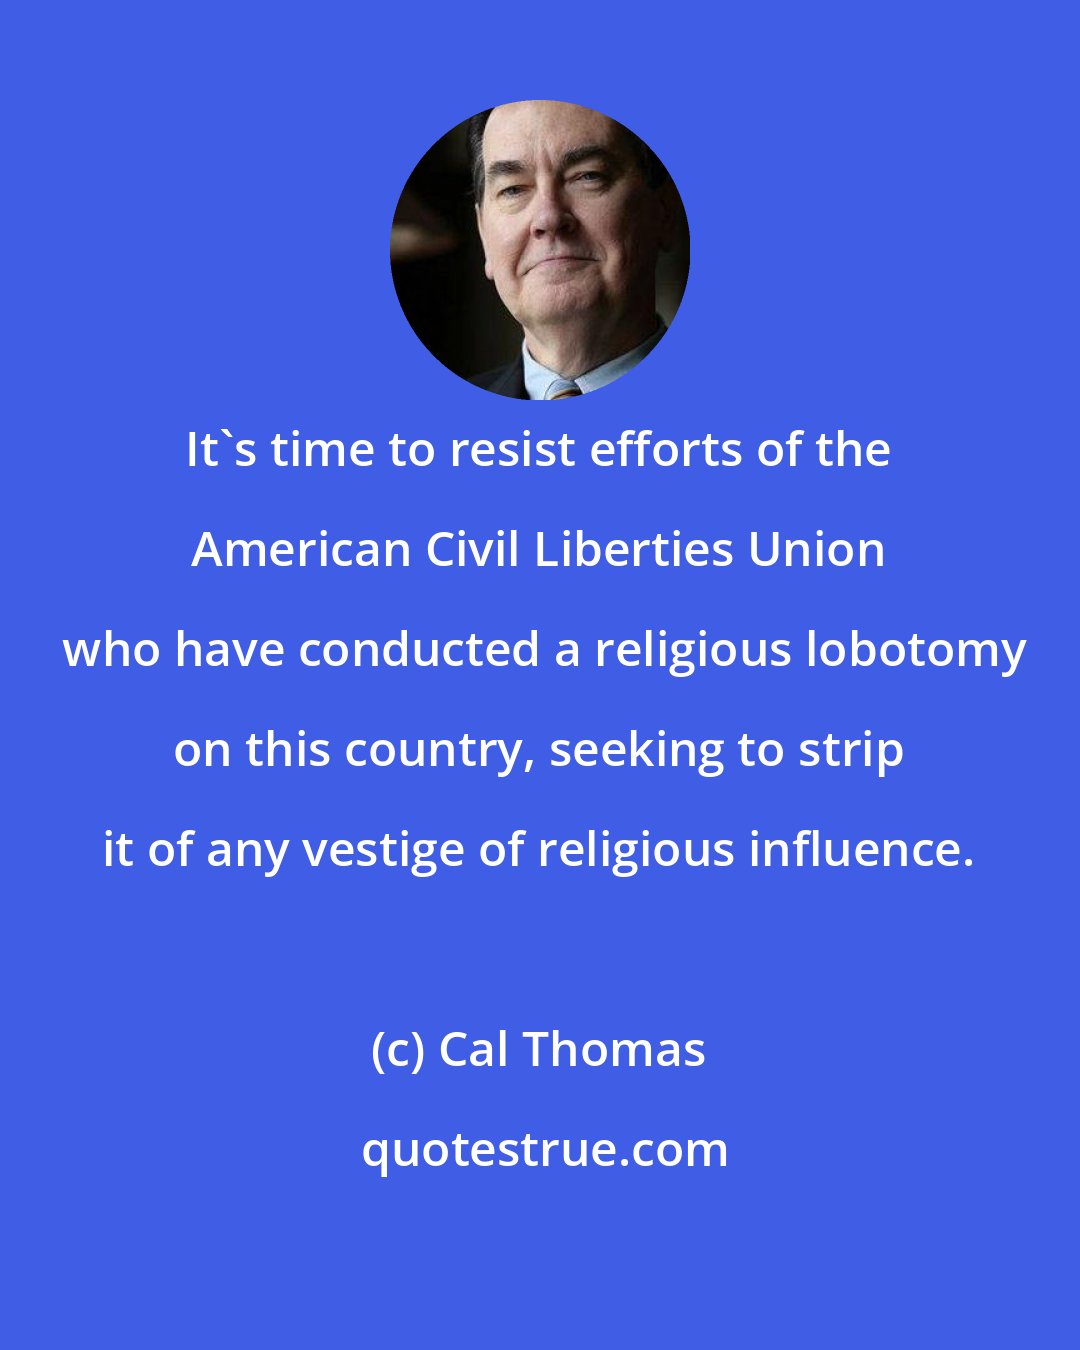 Cal Thomas: It's time to resist efforts of the American Civil Liberties Union  who have conducted a religious lobotomy on this country, seeking to strip it of any vestige of religious influence.